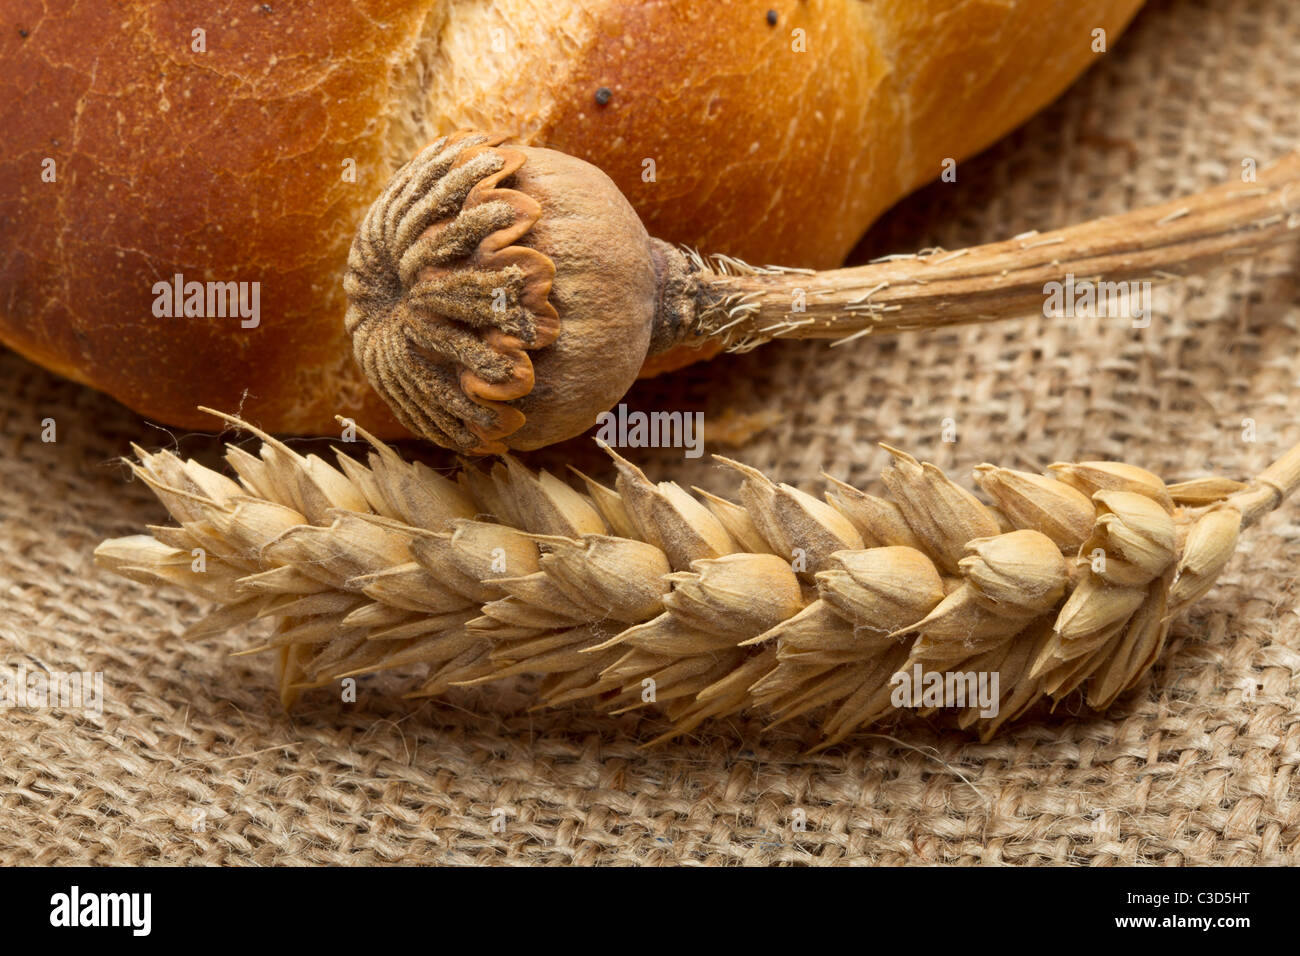 Dried cereal ear and poppy stem with rustic bread concept. Stock Photo